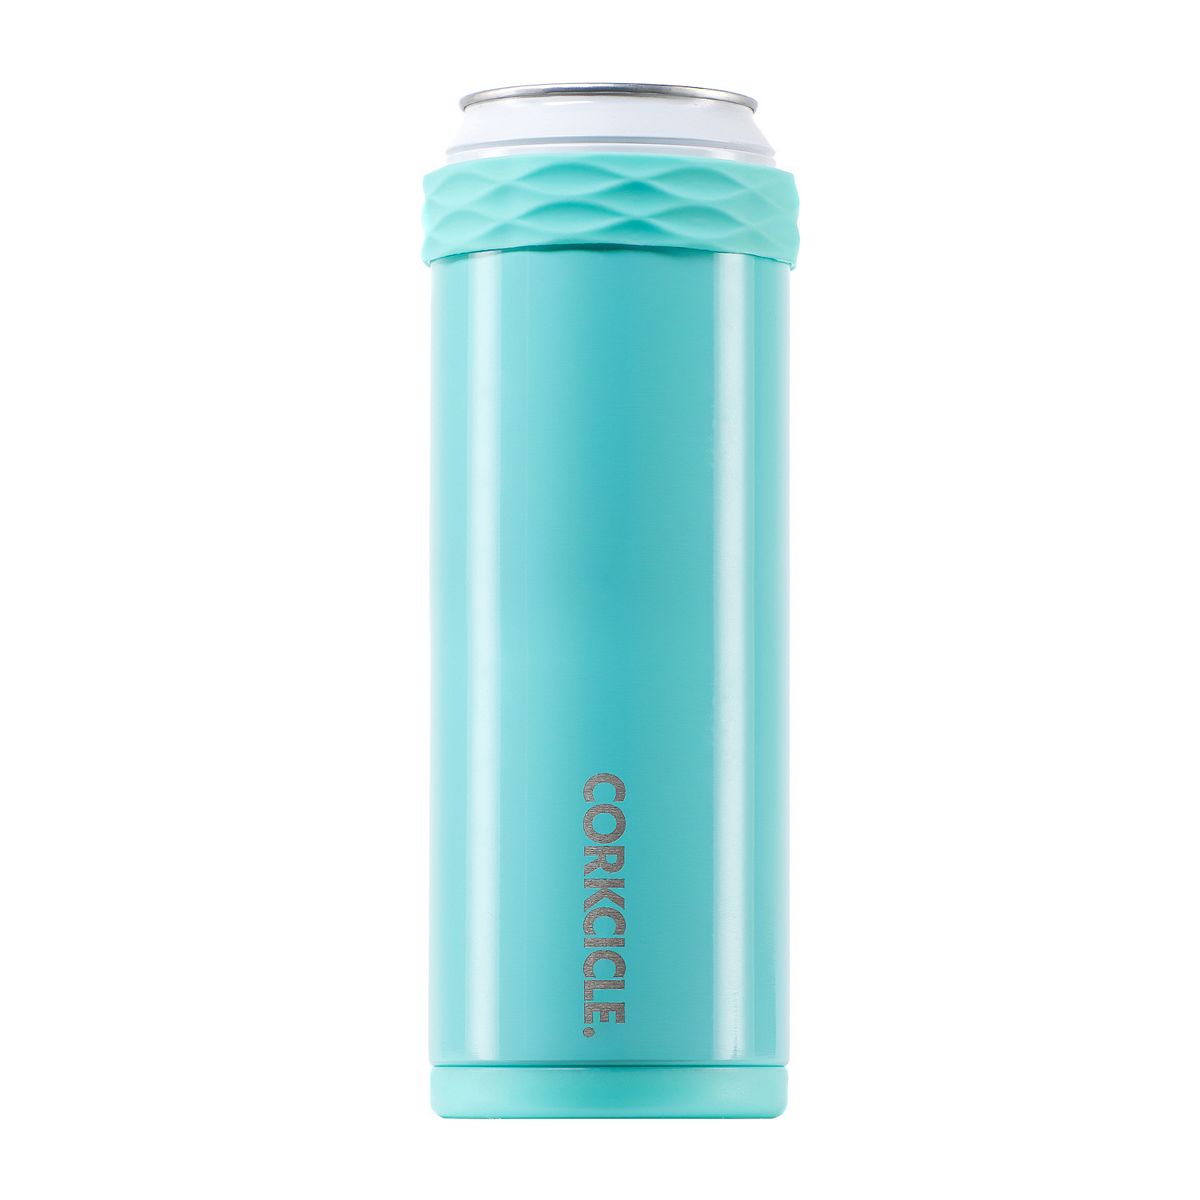 Contigo River North Stainless Steel 2-in-1 Slim Can Cooler and Tumbler with Splash-proof Lid